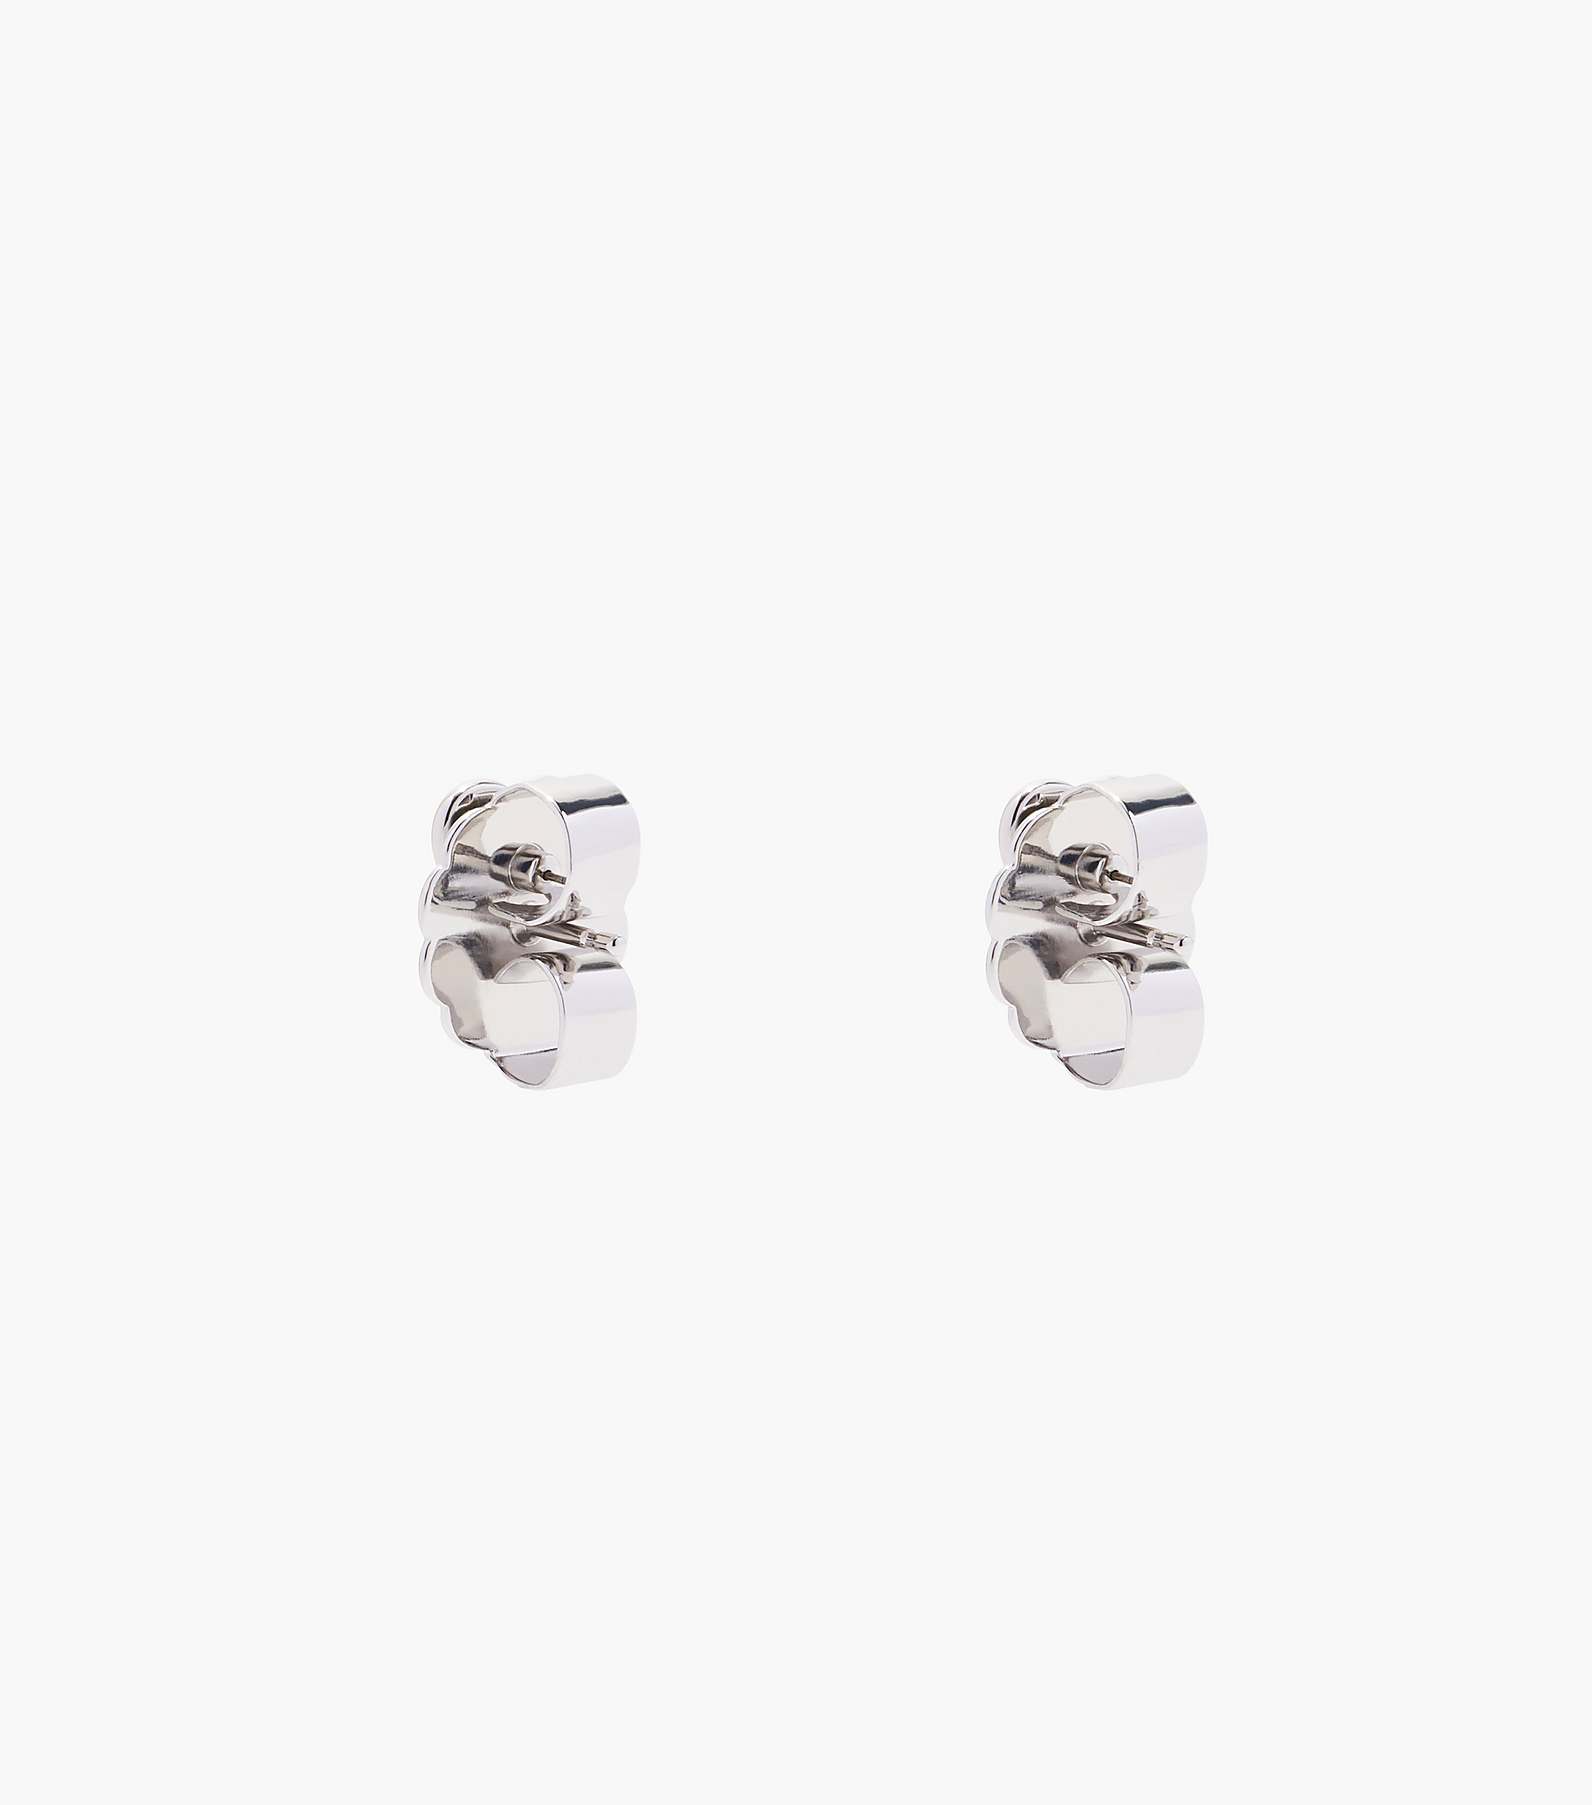 The Charmed Heart Stud Earrings | Marc Jacobs | Official Site